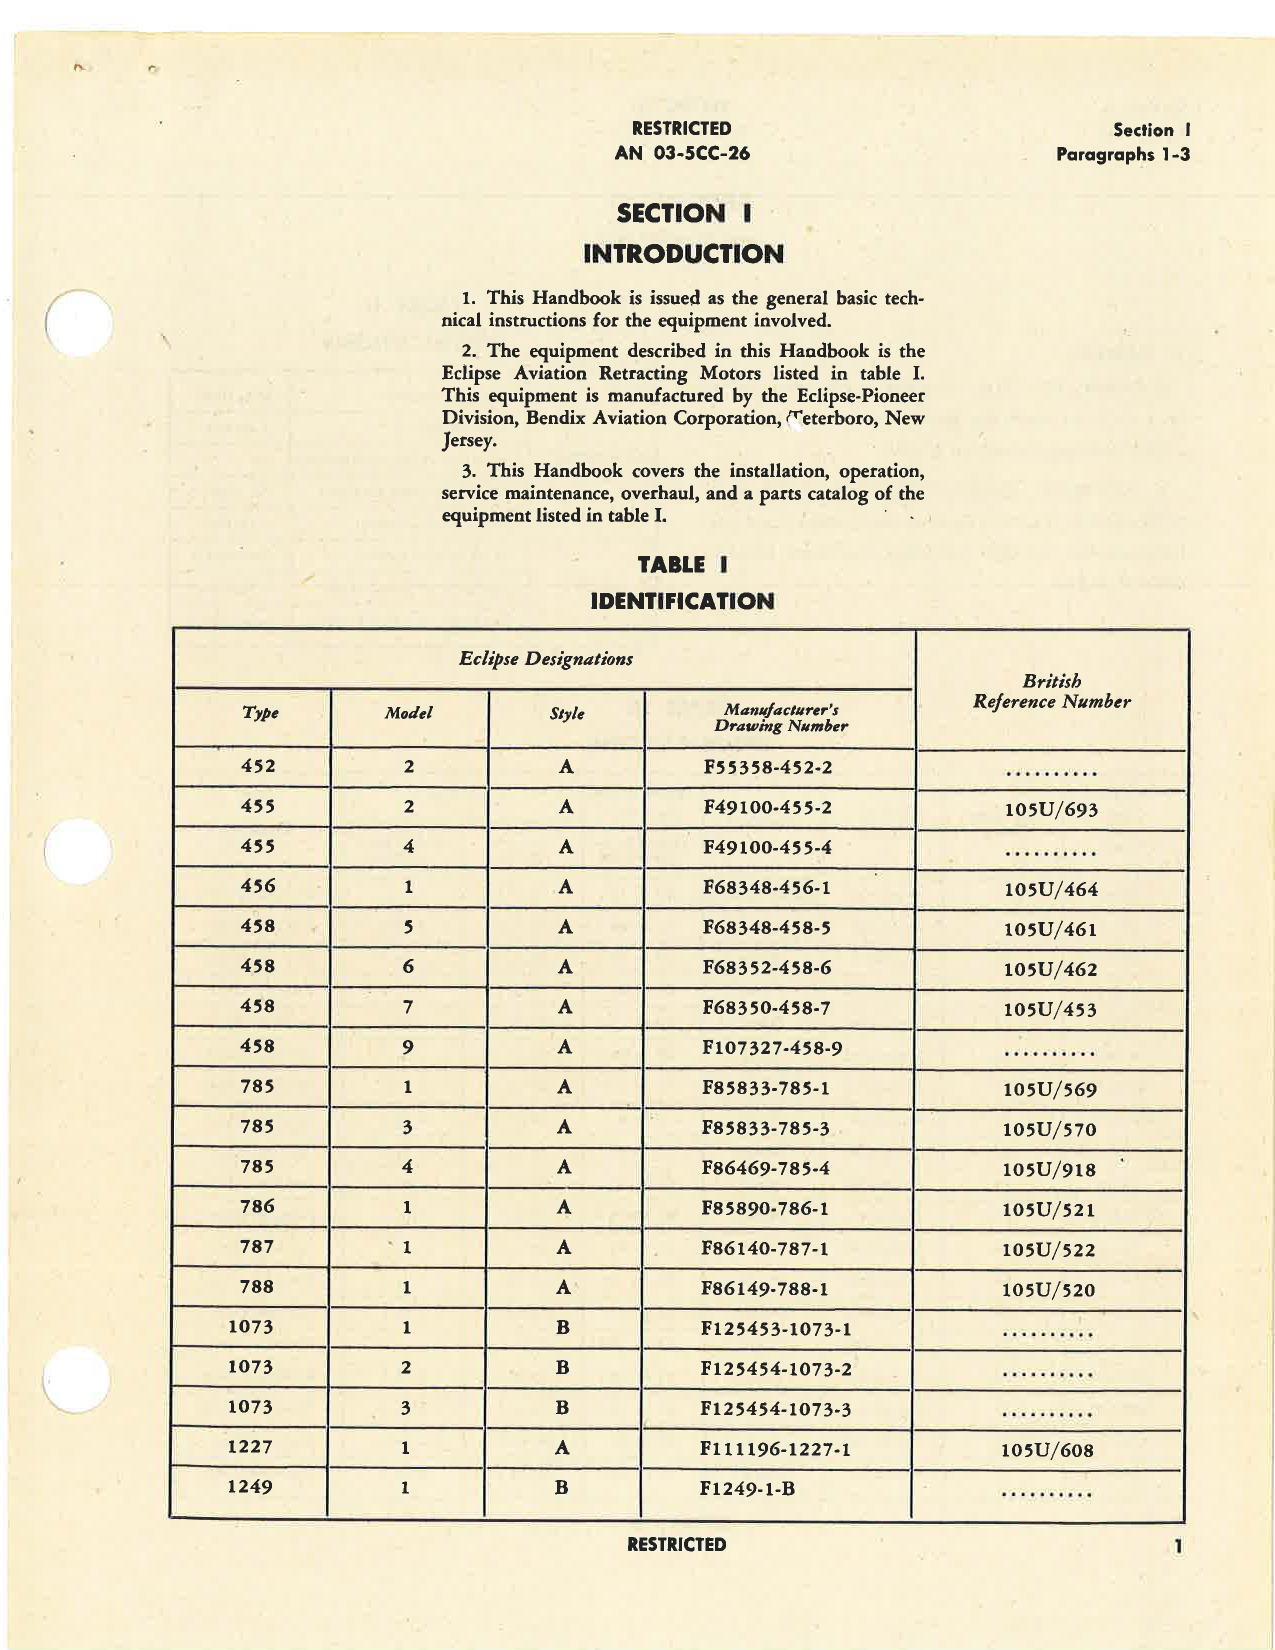 Sample page 7 from AirCorps Library document: Handbook of Instructions with Parts Catalog for Retracting Motors